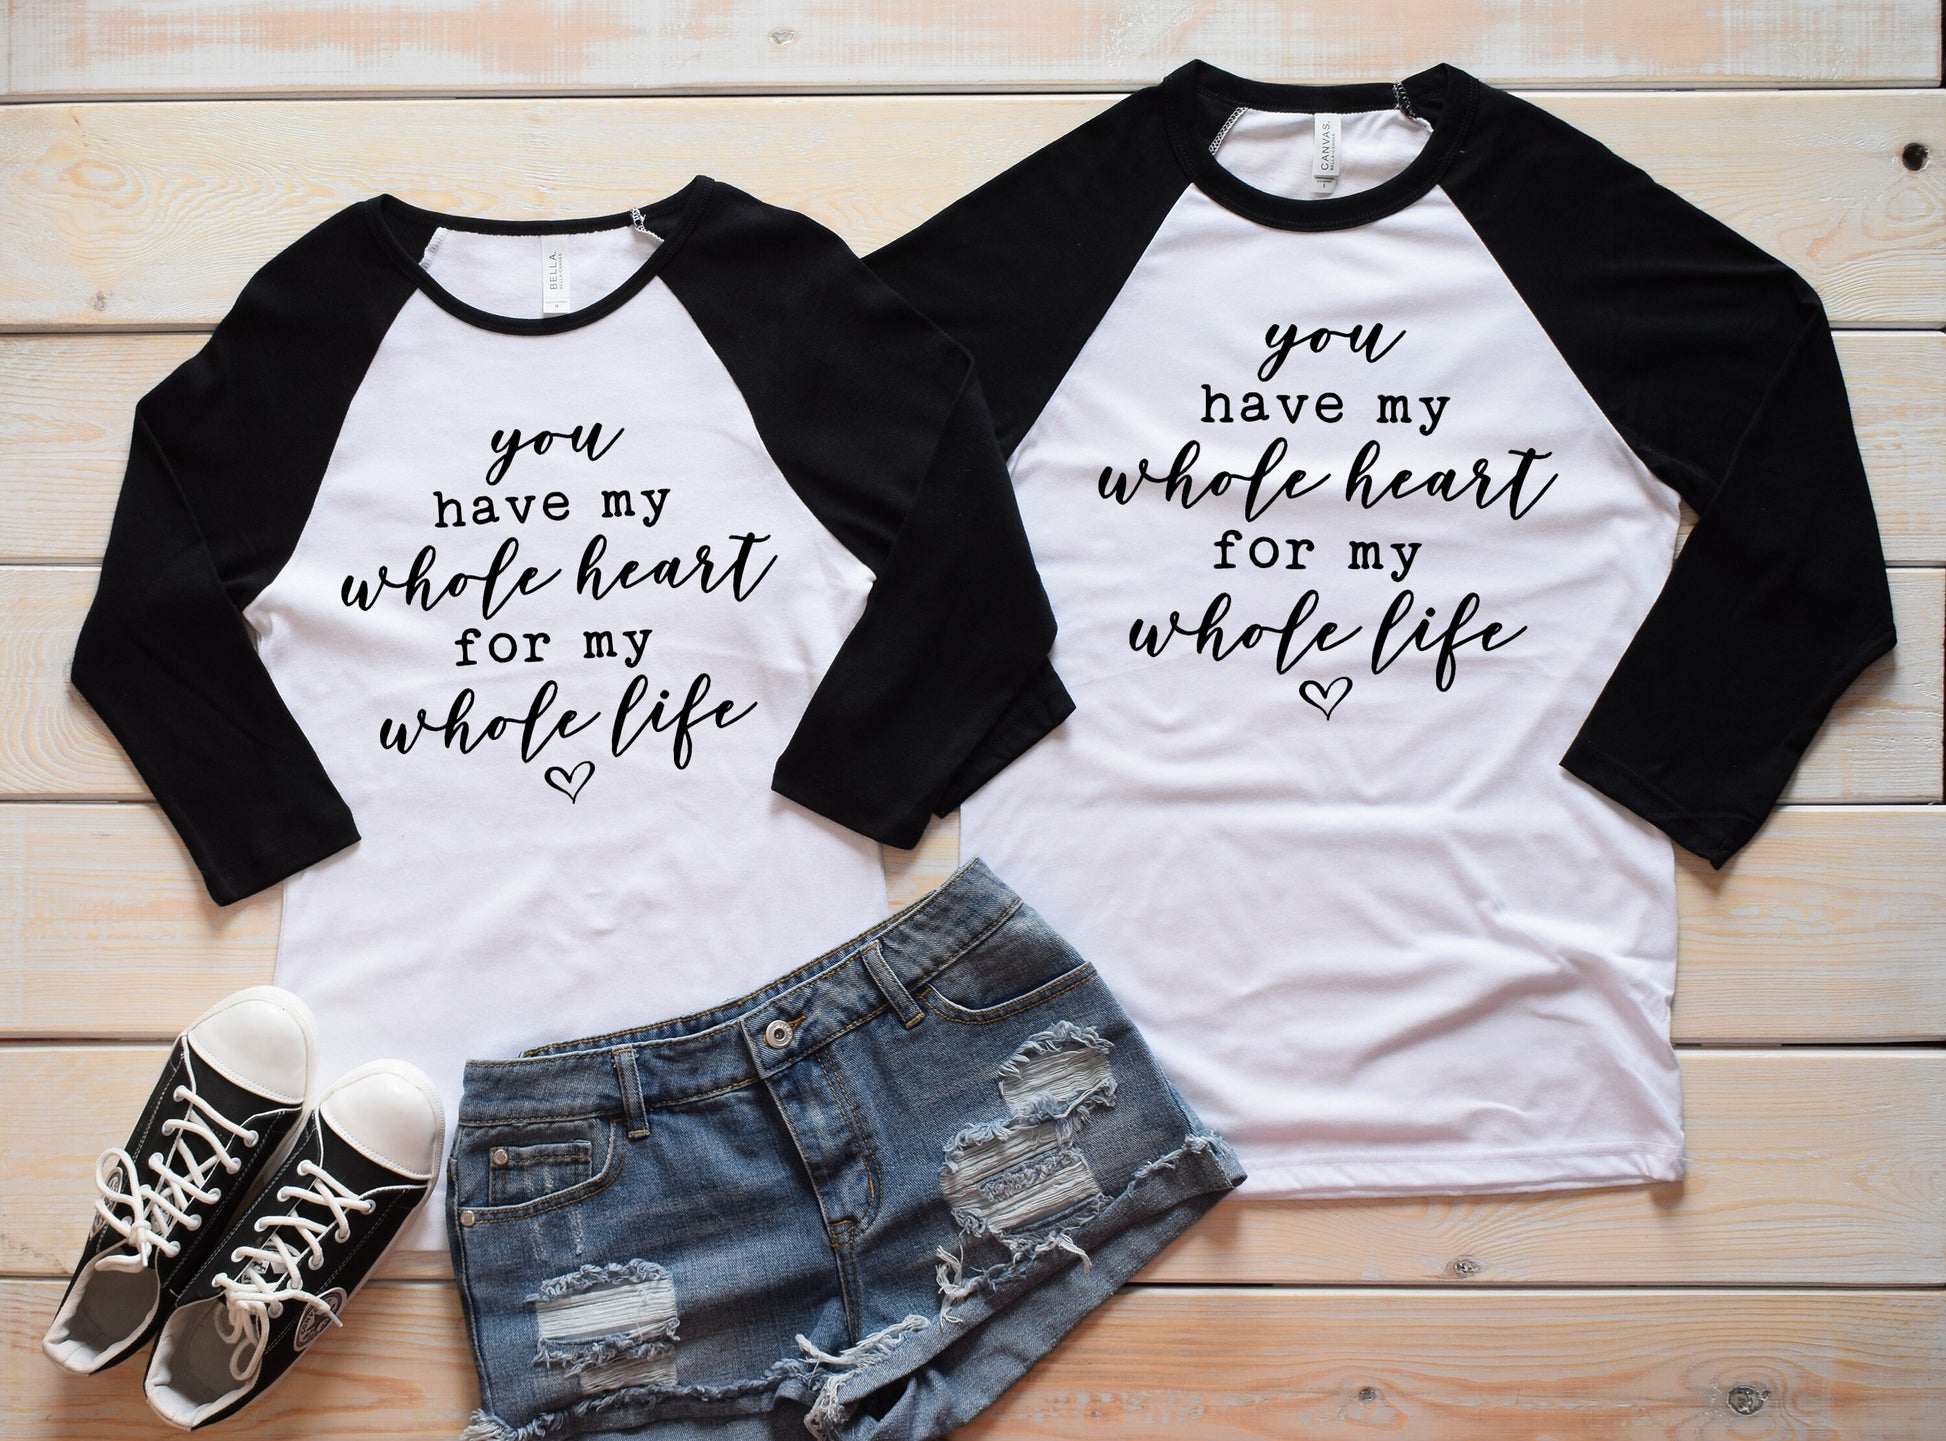 You Have My Whole Heart For My Whole Life Matching unisex raglan t-shirts - couple shirts - mr mrs shirts - girlfriend gift - honeymoon tees